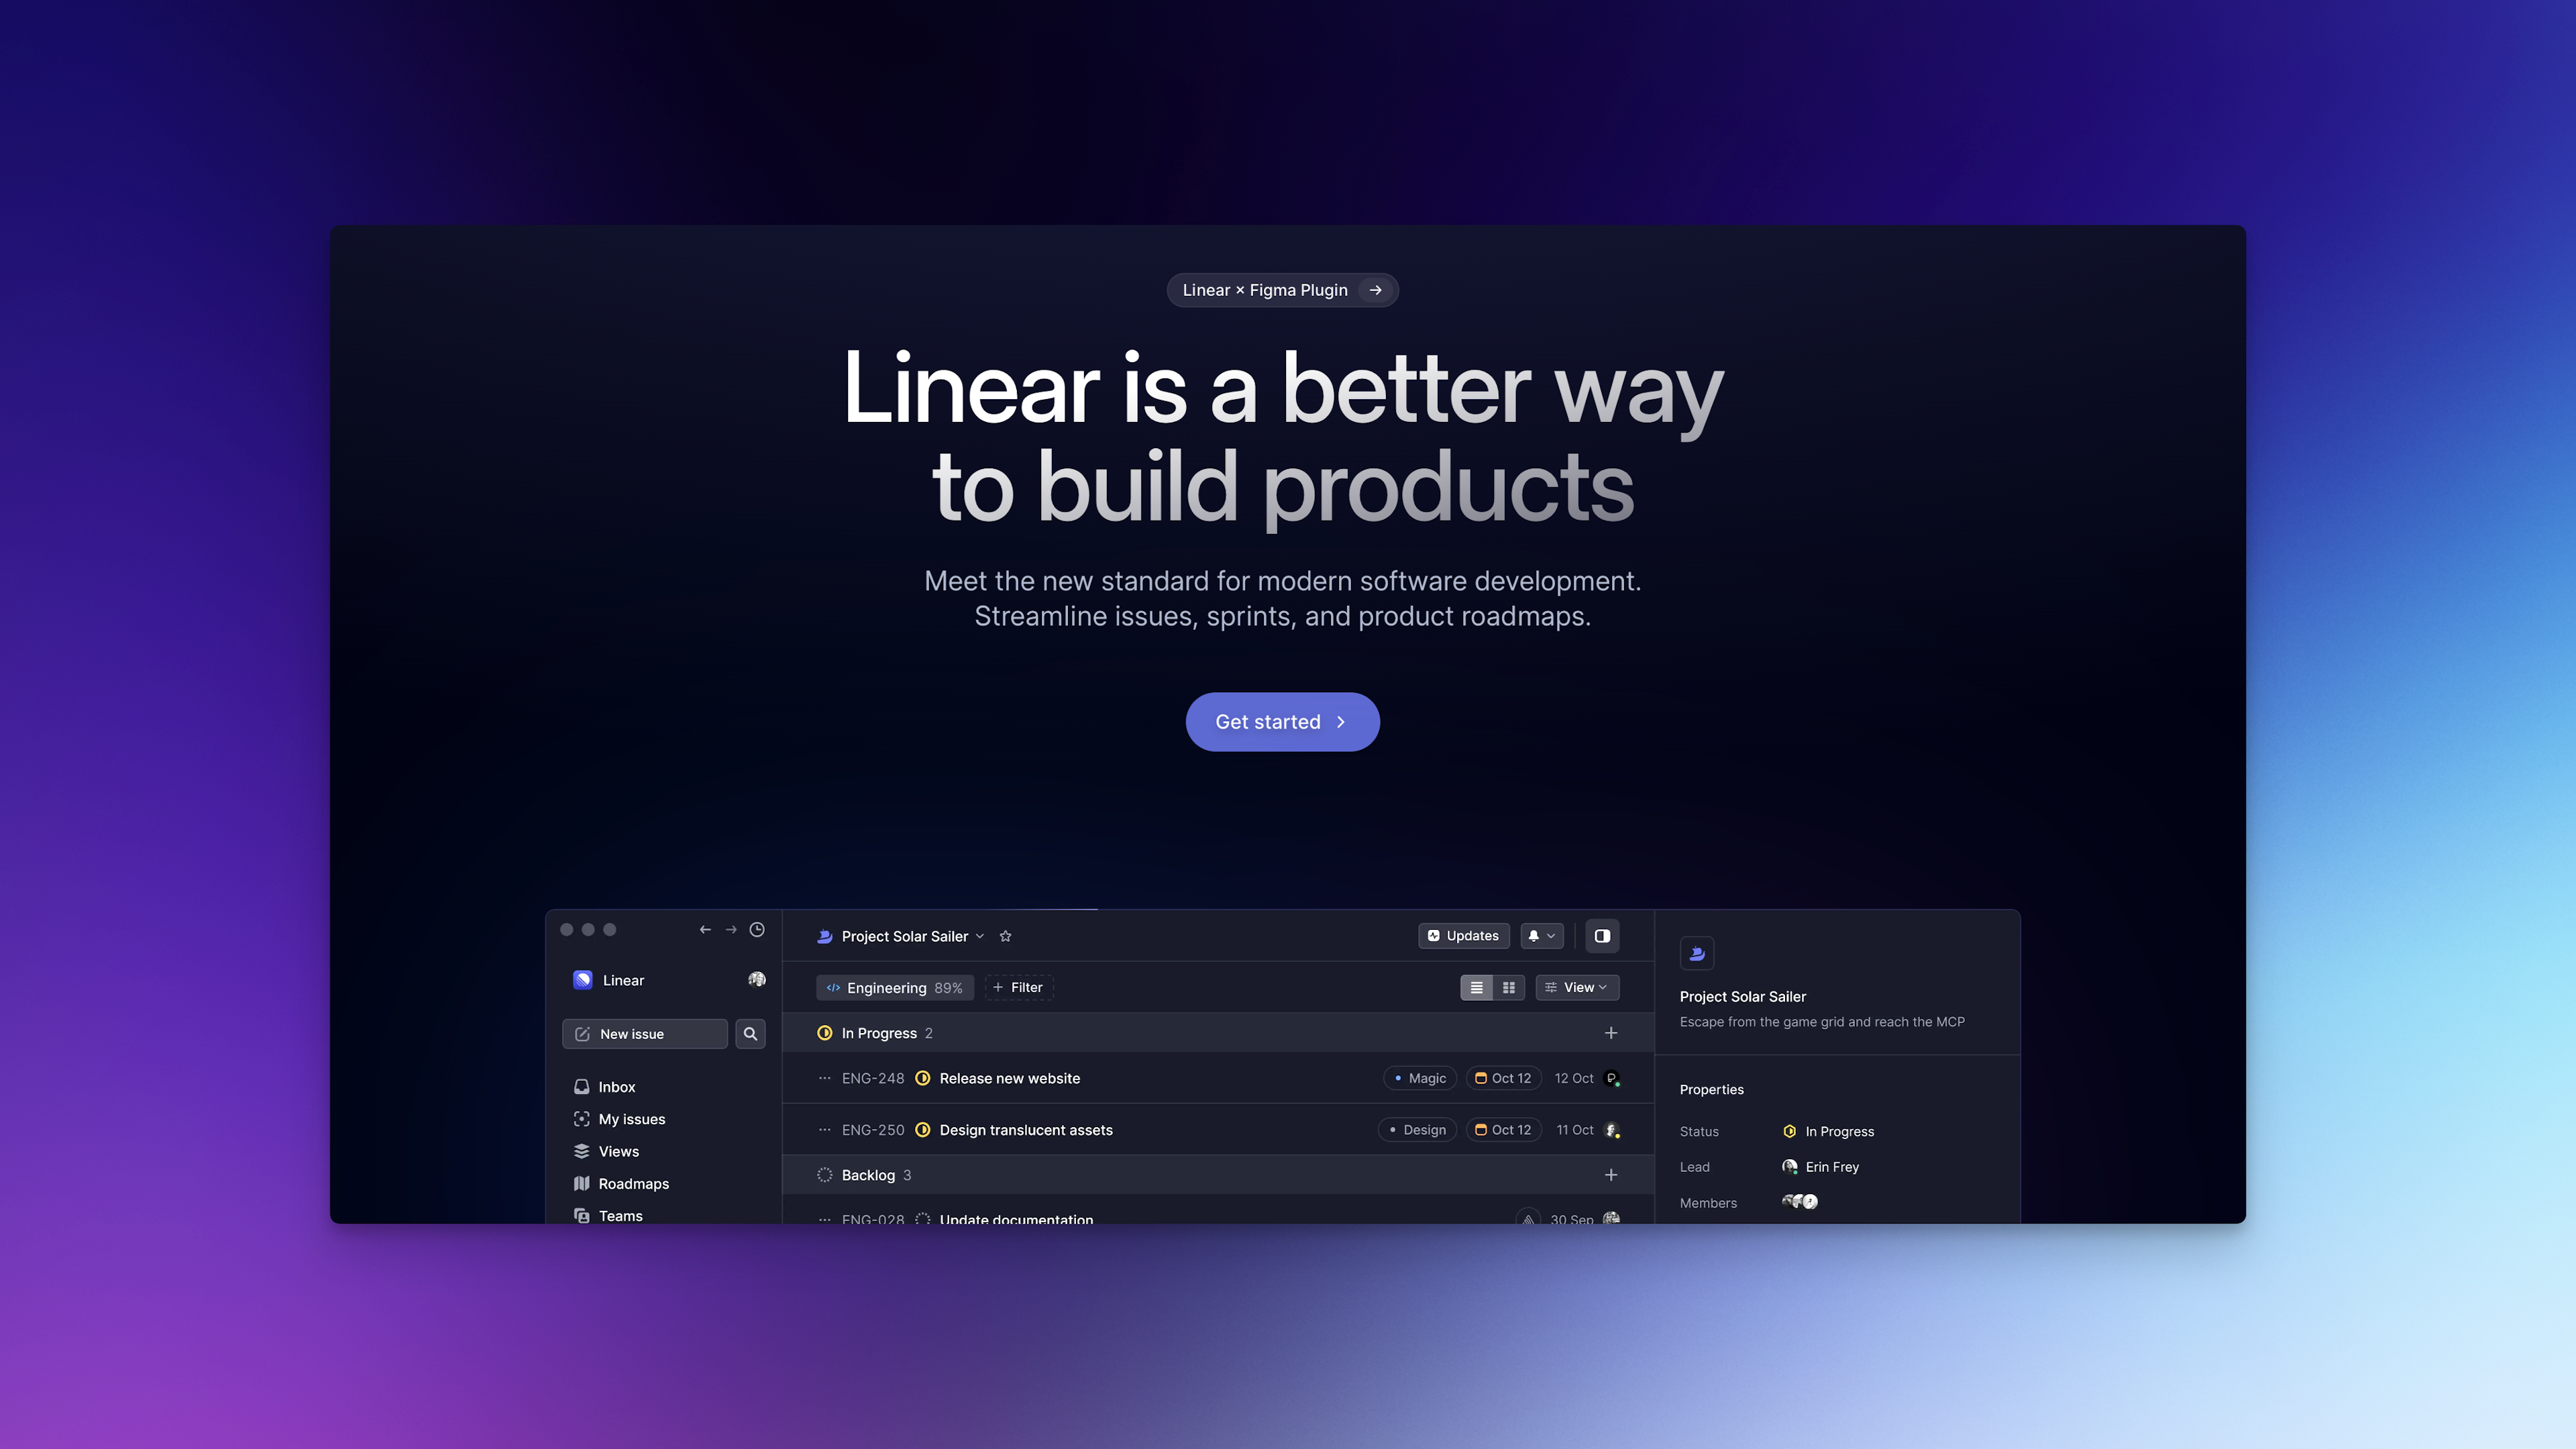 Homepage of Linear with some text and button to open app